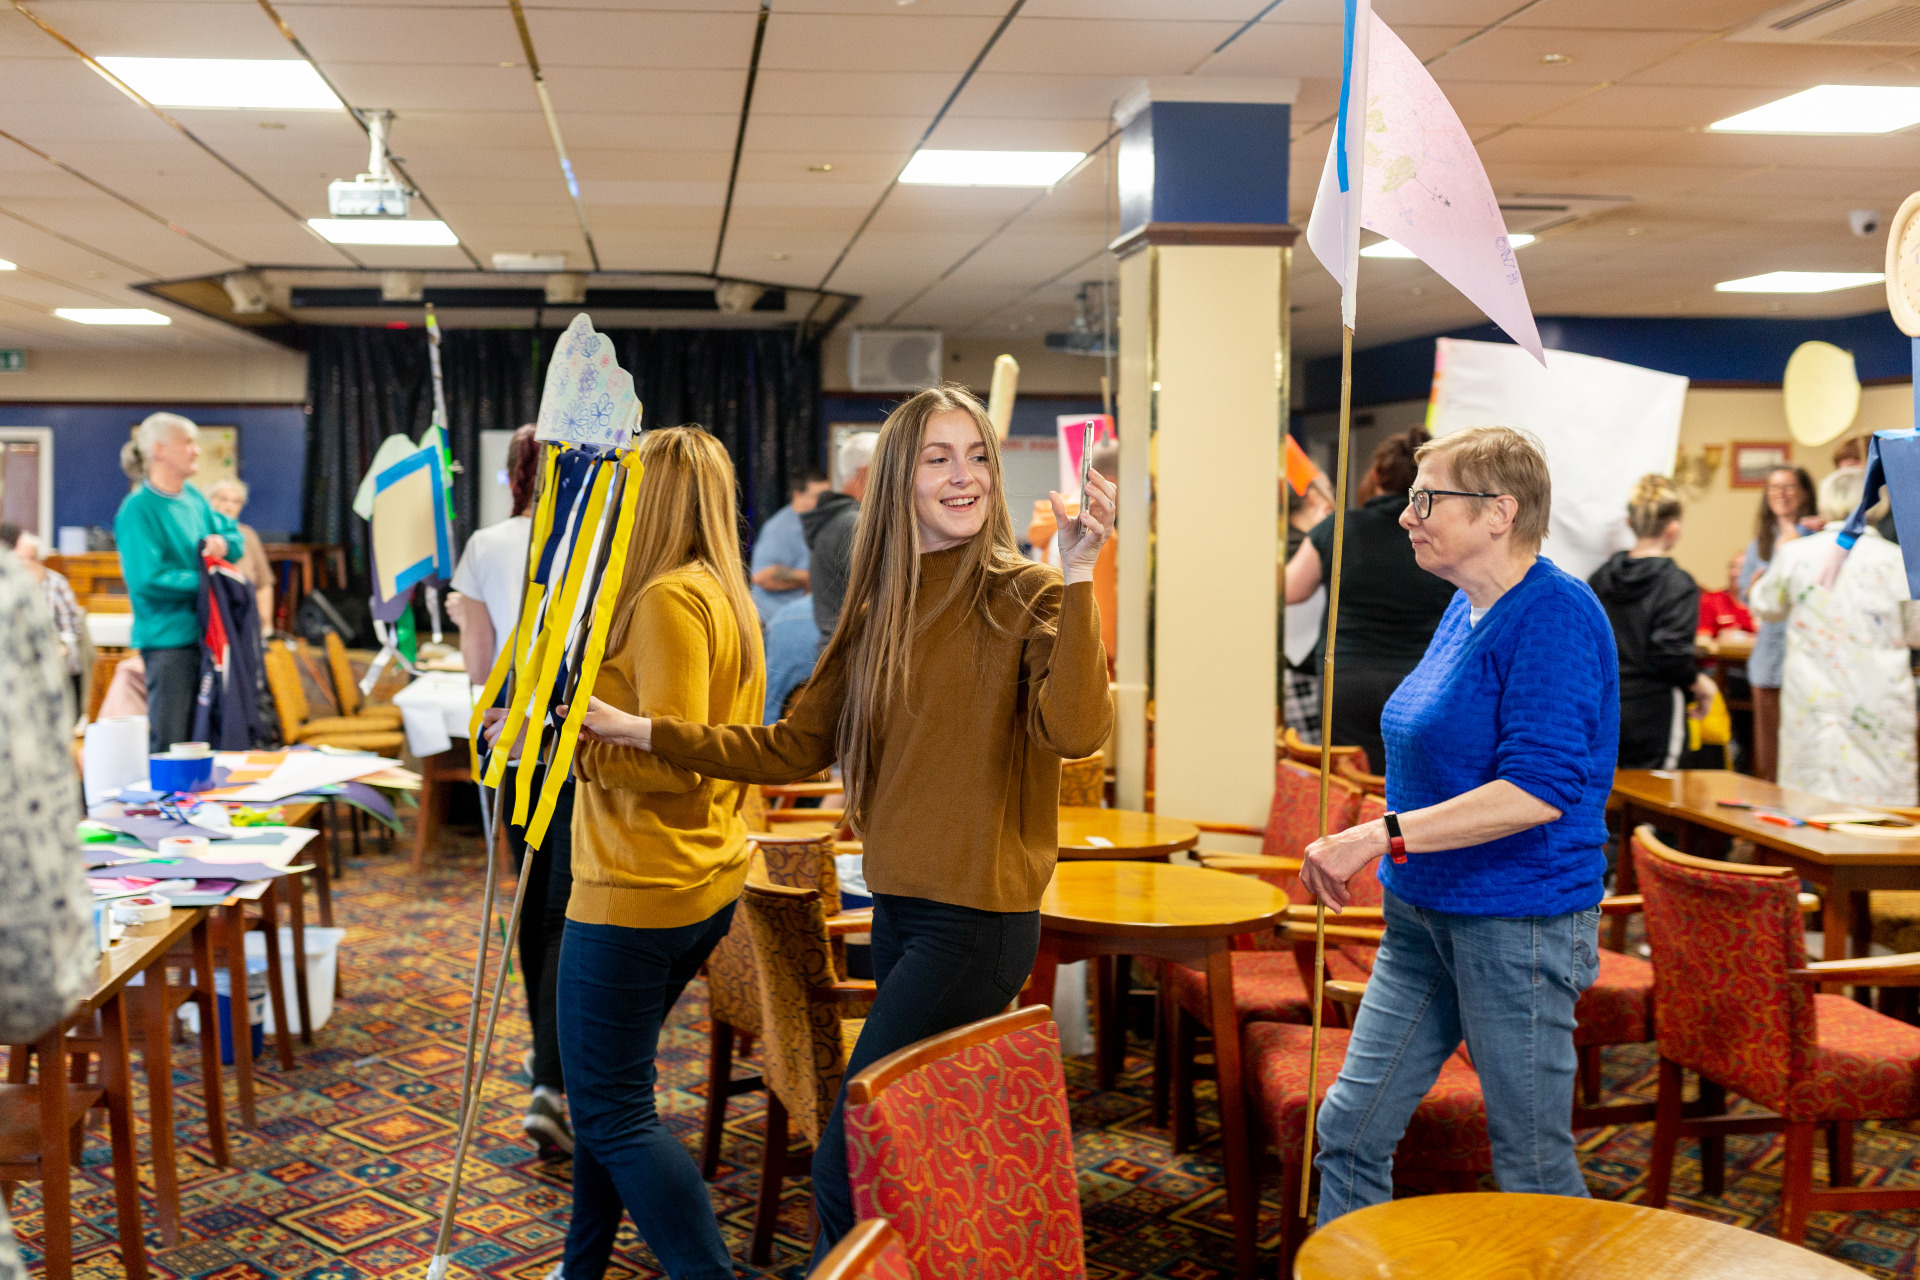 A group of people are walking around a large room with colourful carpet and lots of tables a chairs. Many of them are holding handmade flags on long sticks. A women in the forefront with long brown hair is smiling and taking a photo of the action on her phone.